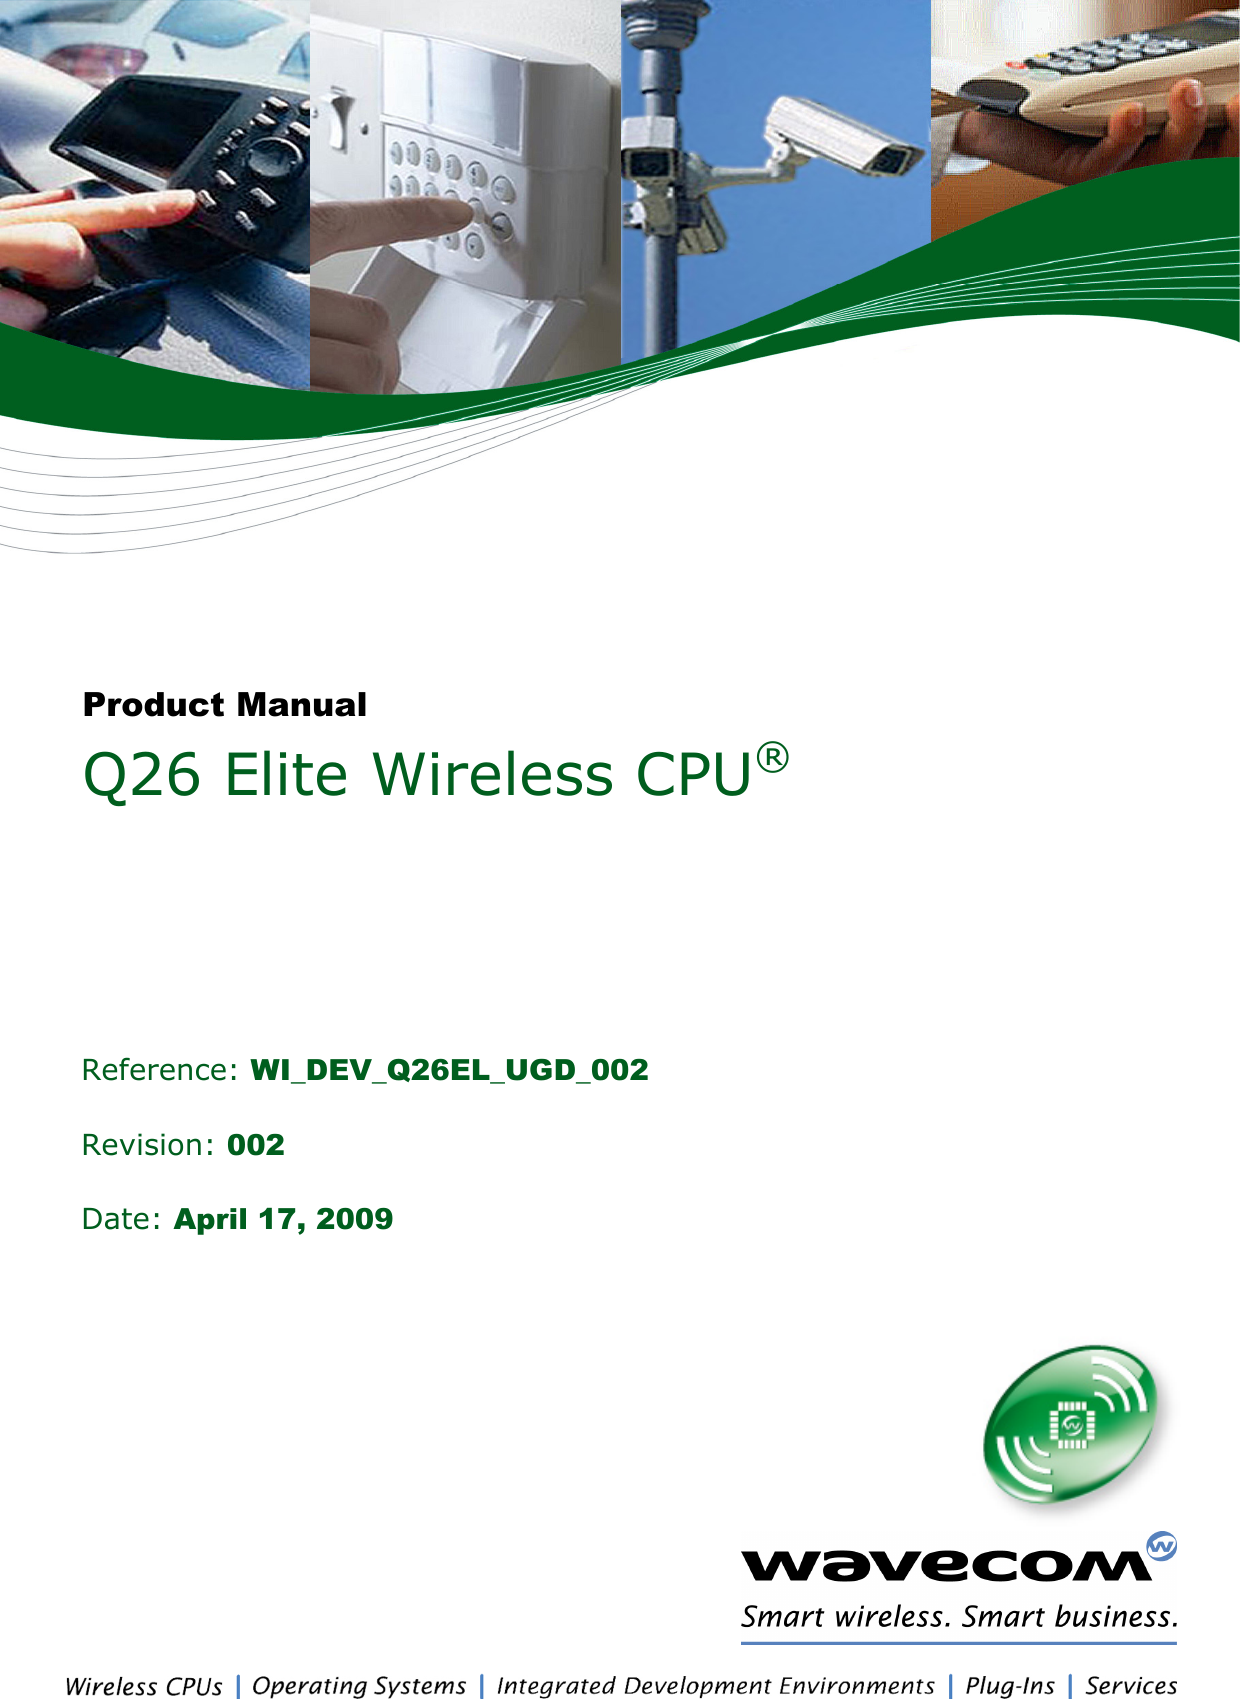   Revision: 002 Date: April 17, 2009 Reference: WI_DEV_Q26EL_UGD_002 Q26 Elite Wireless CPU® Product Manual 